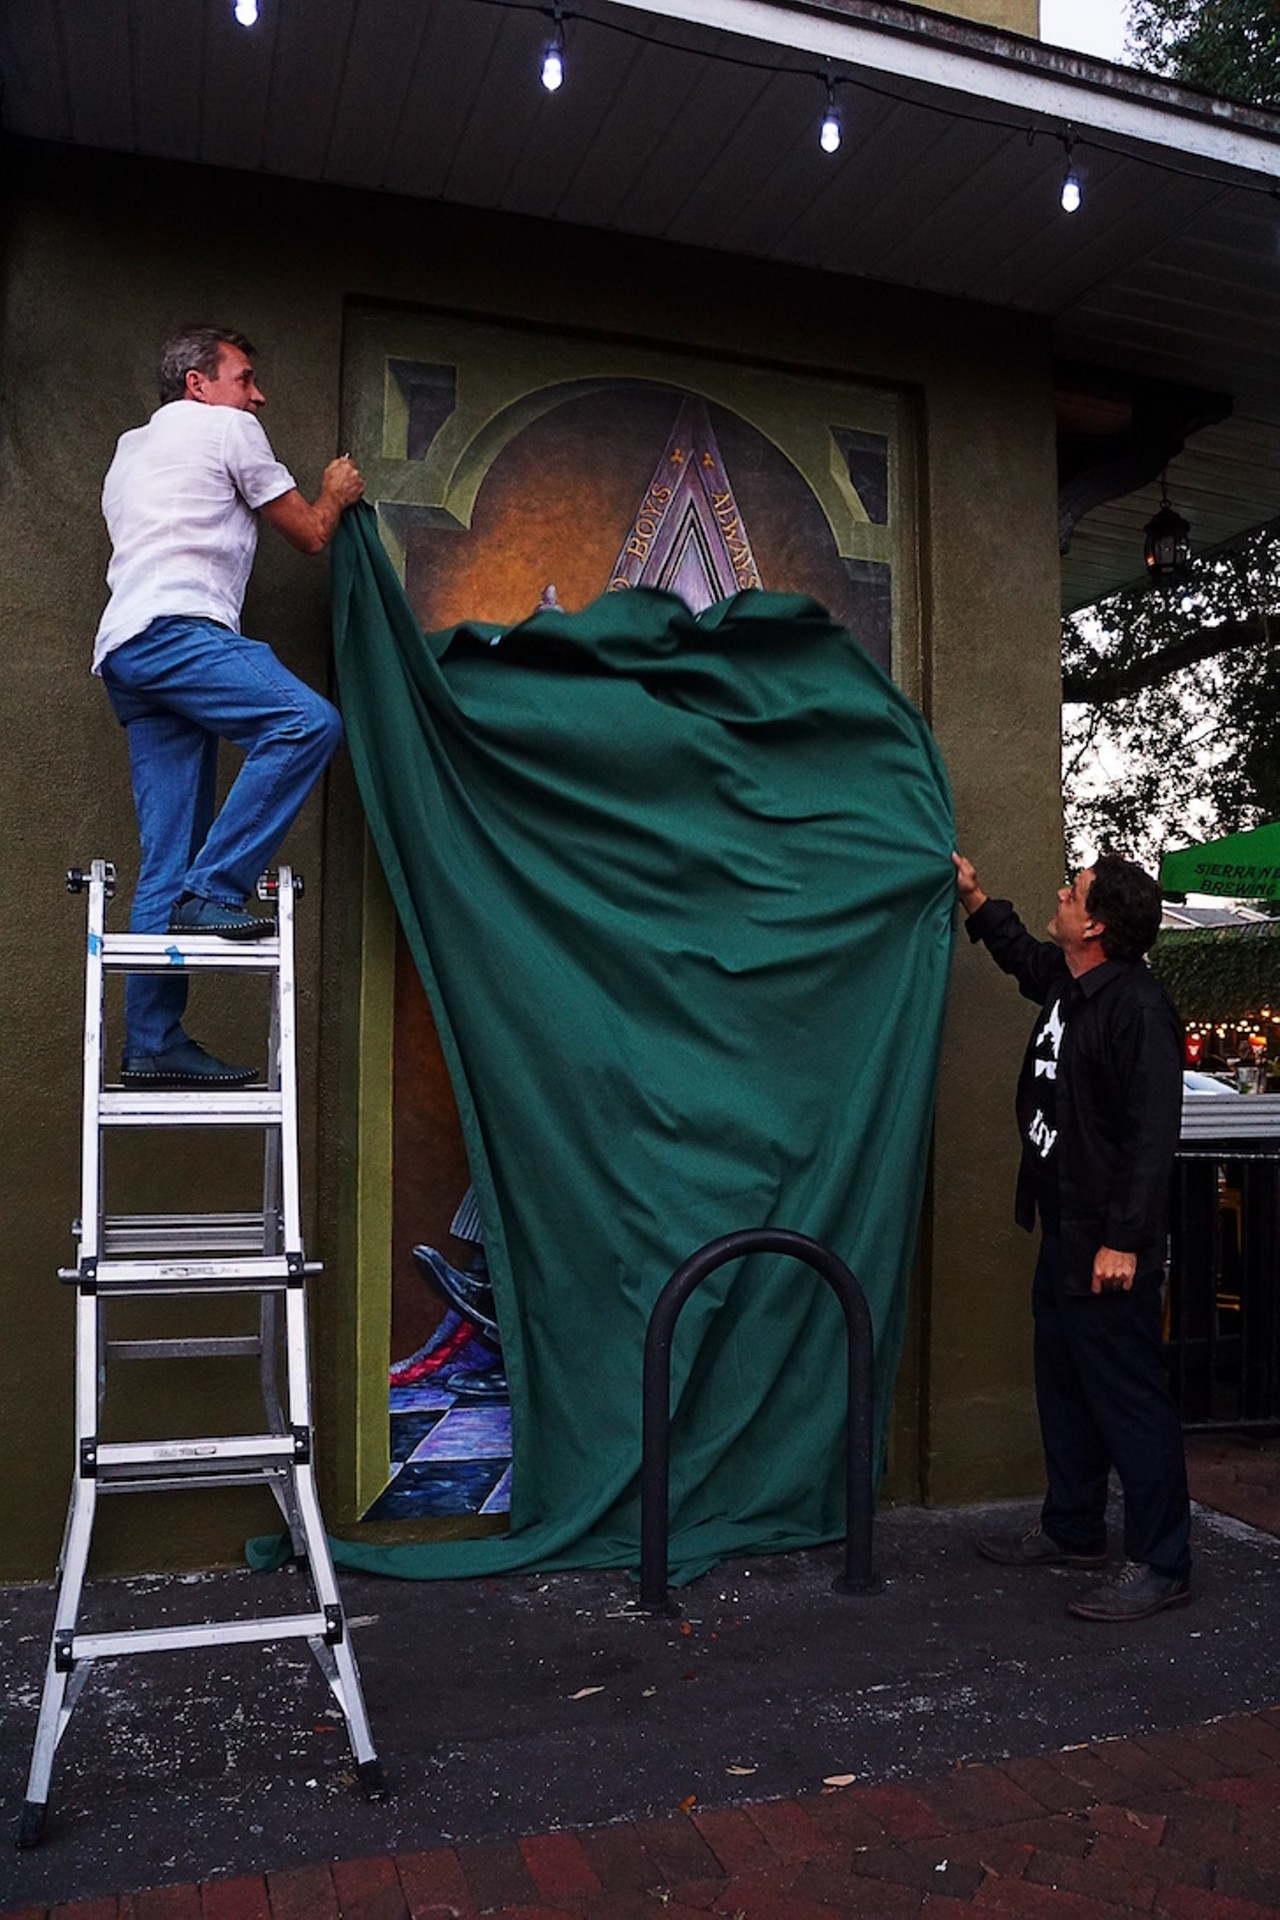 Photos from the Billy Manes Legacy Mural unveiling in Thornton Park